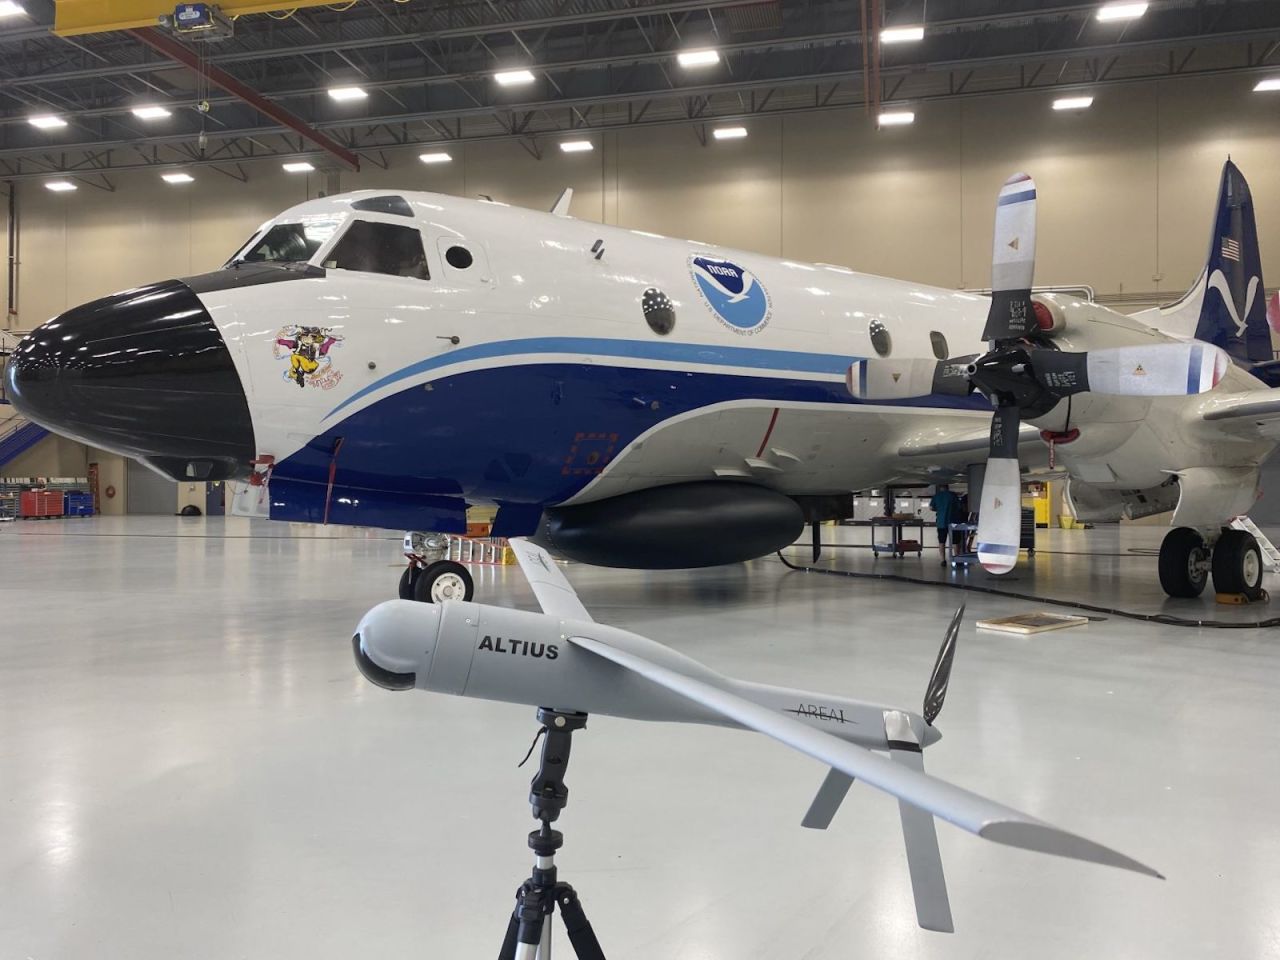 The Hurricane Hunters have a new tool at their disposal. In September 2022, for the first time, the NOAA deployed an Altius-600 uncrewed aircraft system -- pictured in the foreground. It has a range of 275 miles and can reach areas of a storm that are too dangerous for humans.